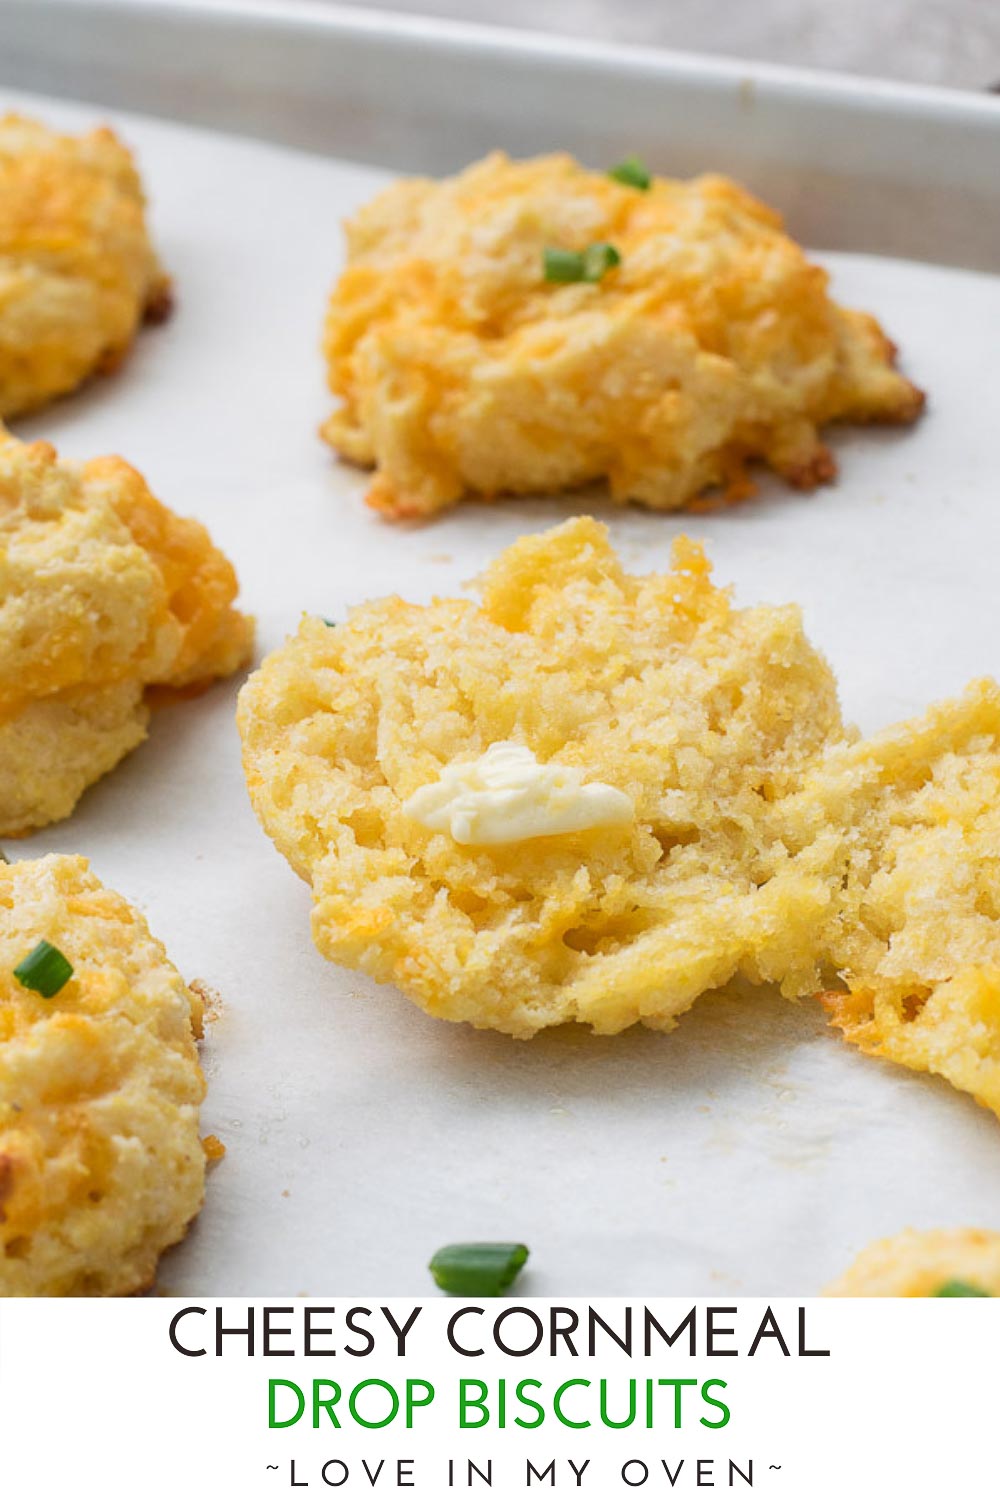 Cheesy Cornmeal Drop Biscuits